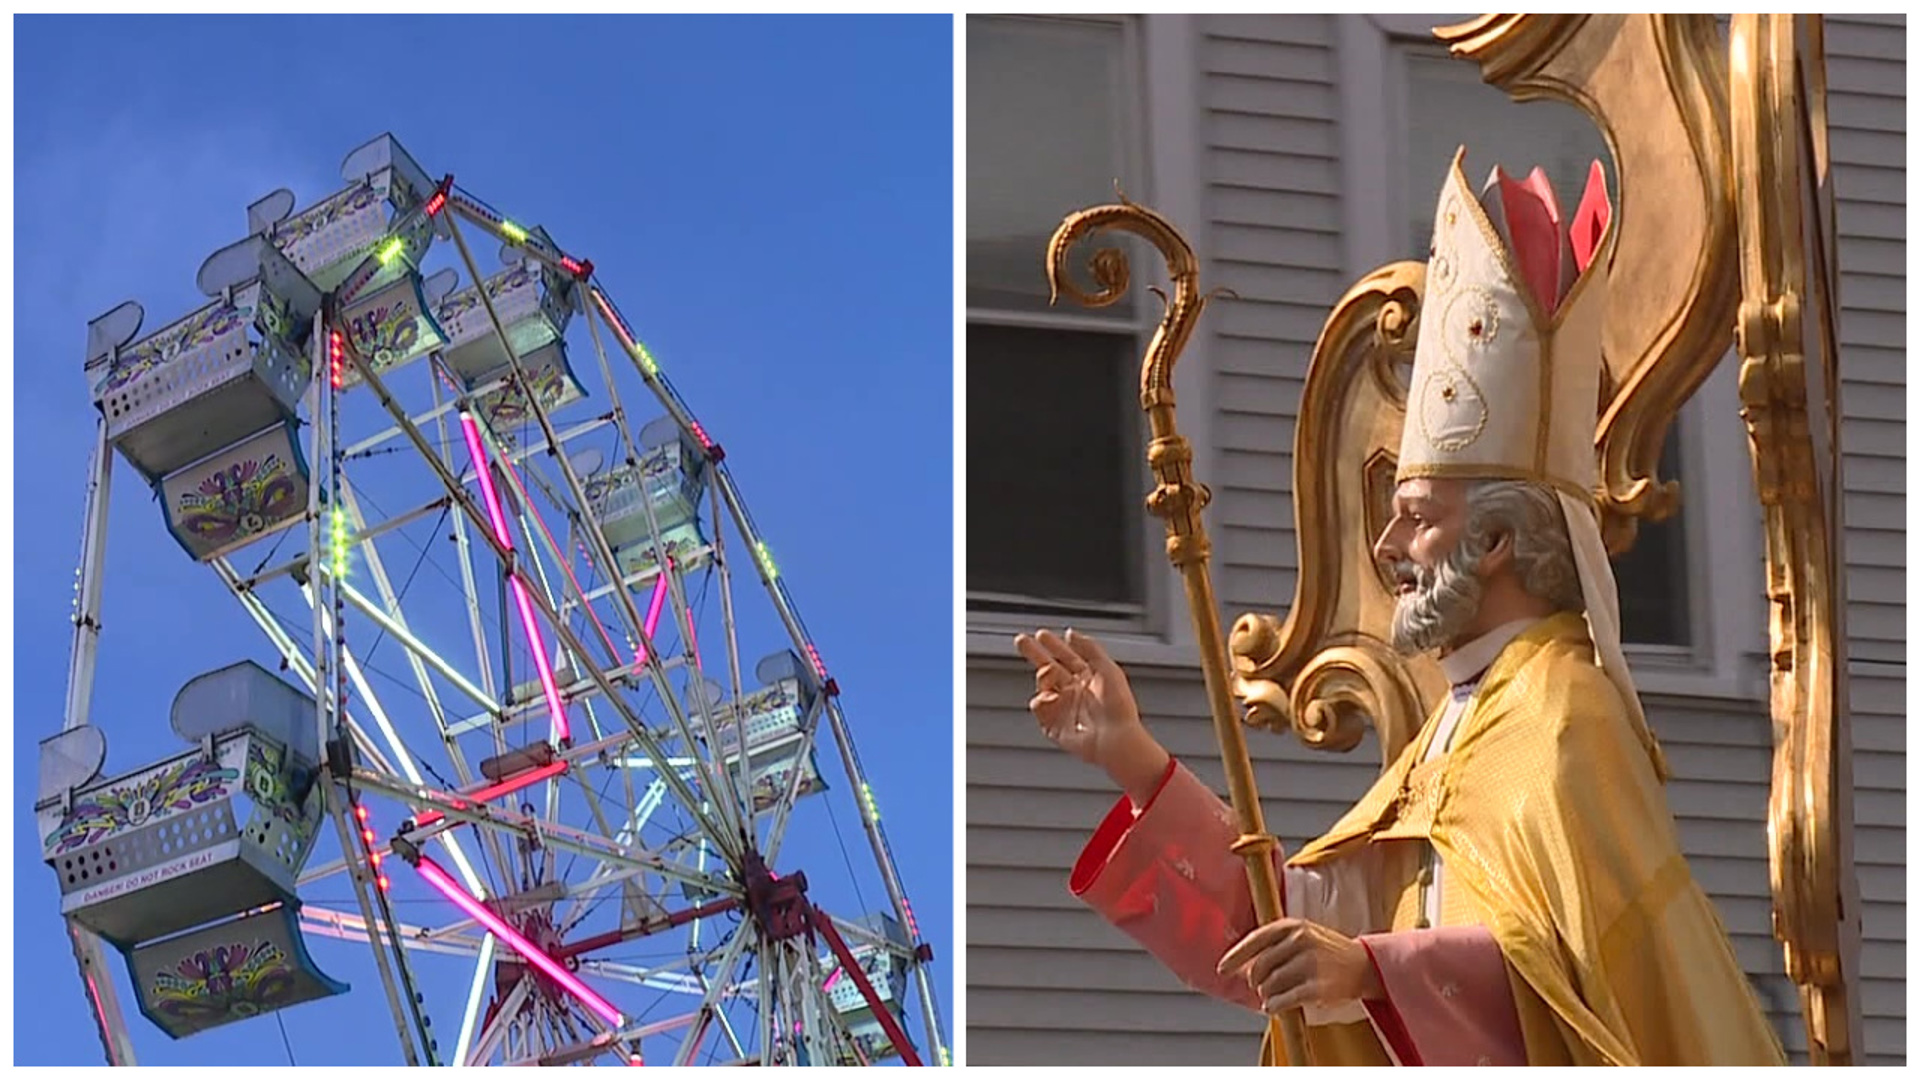 This weekend is the Jessup Hose Company #2 Carnival and the St. Ubaldo Day Running of the Saints.